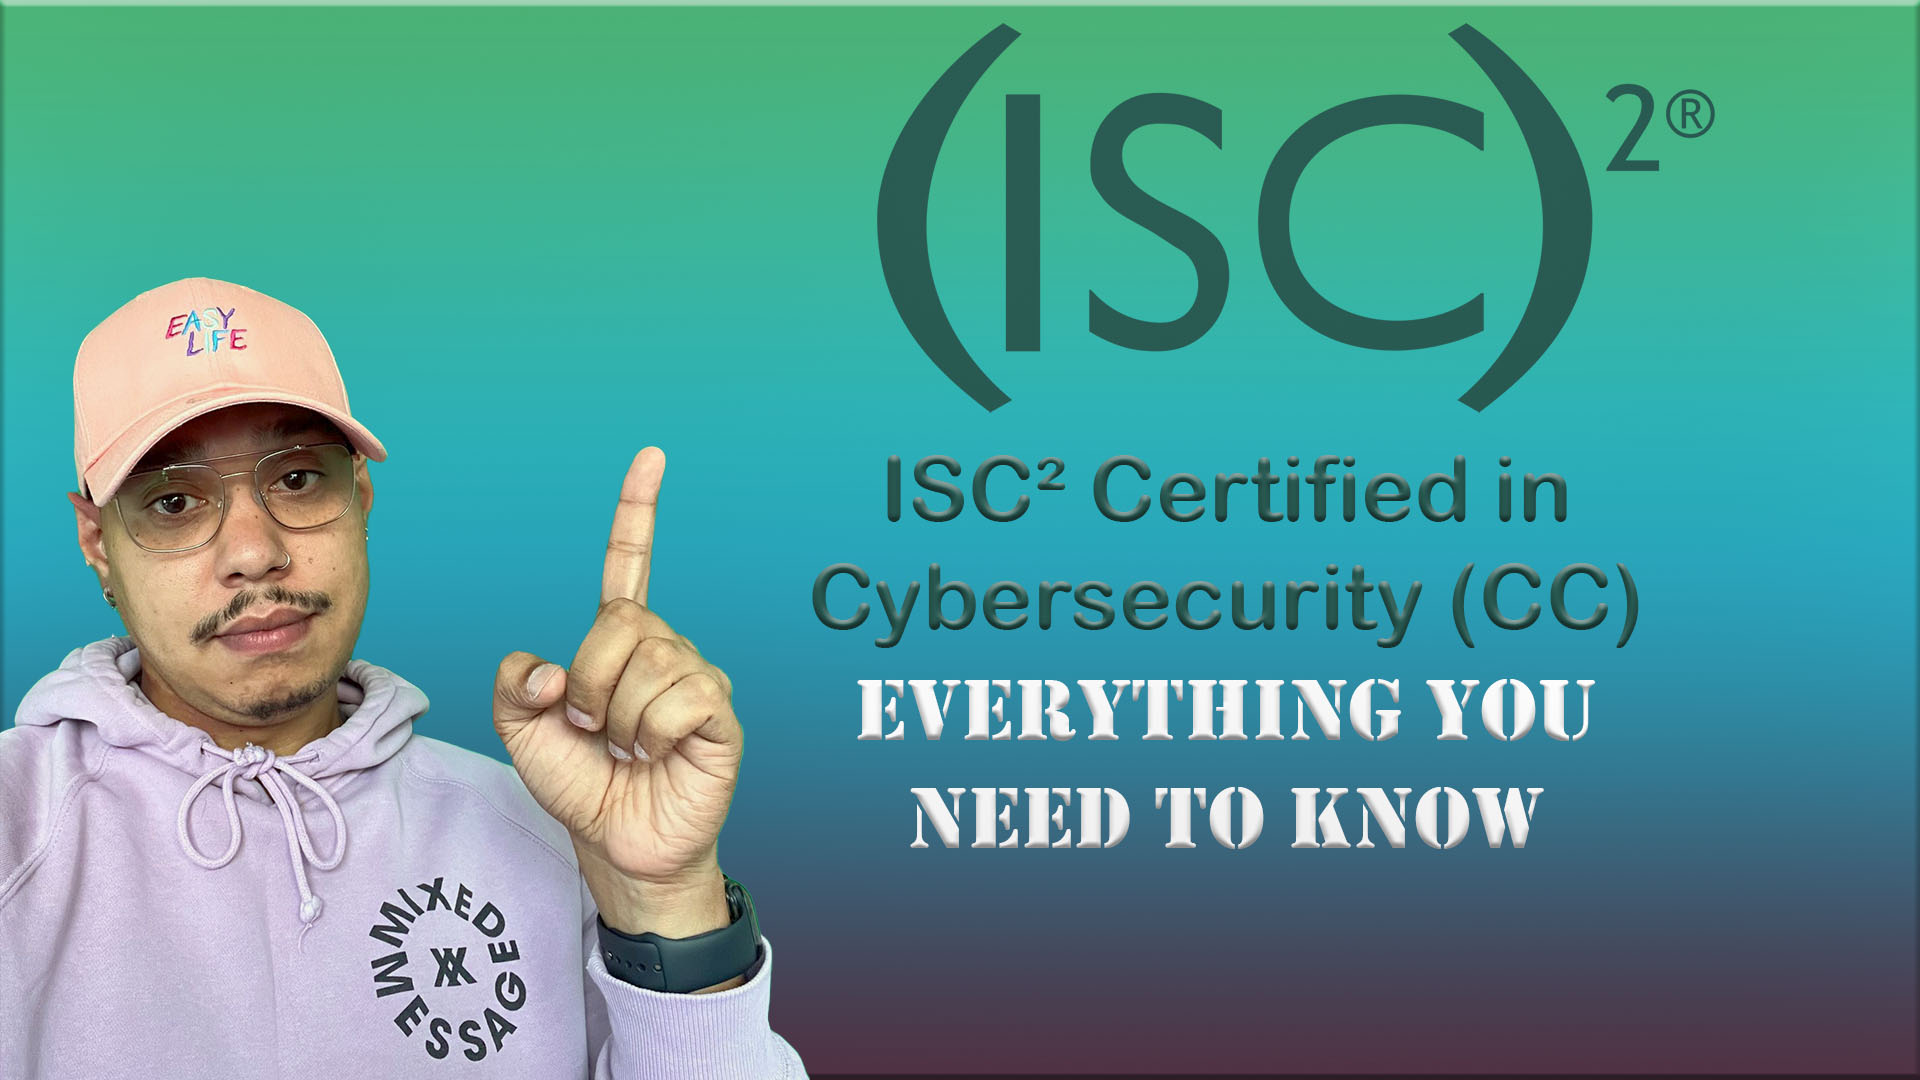 Video: ISC² Certified in Cybersecurity (CC): Everything You Need to Know